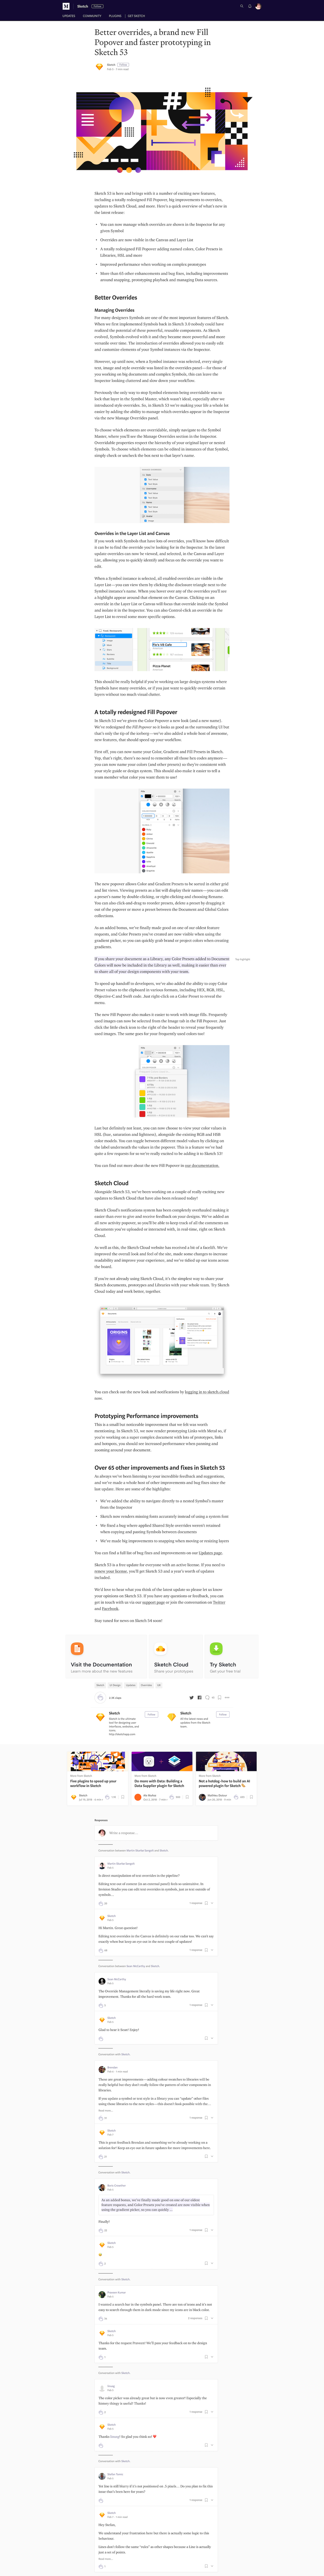 Screenshot of the Blog - Article page from the Sketch website.